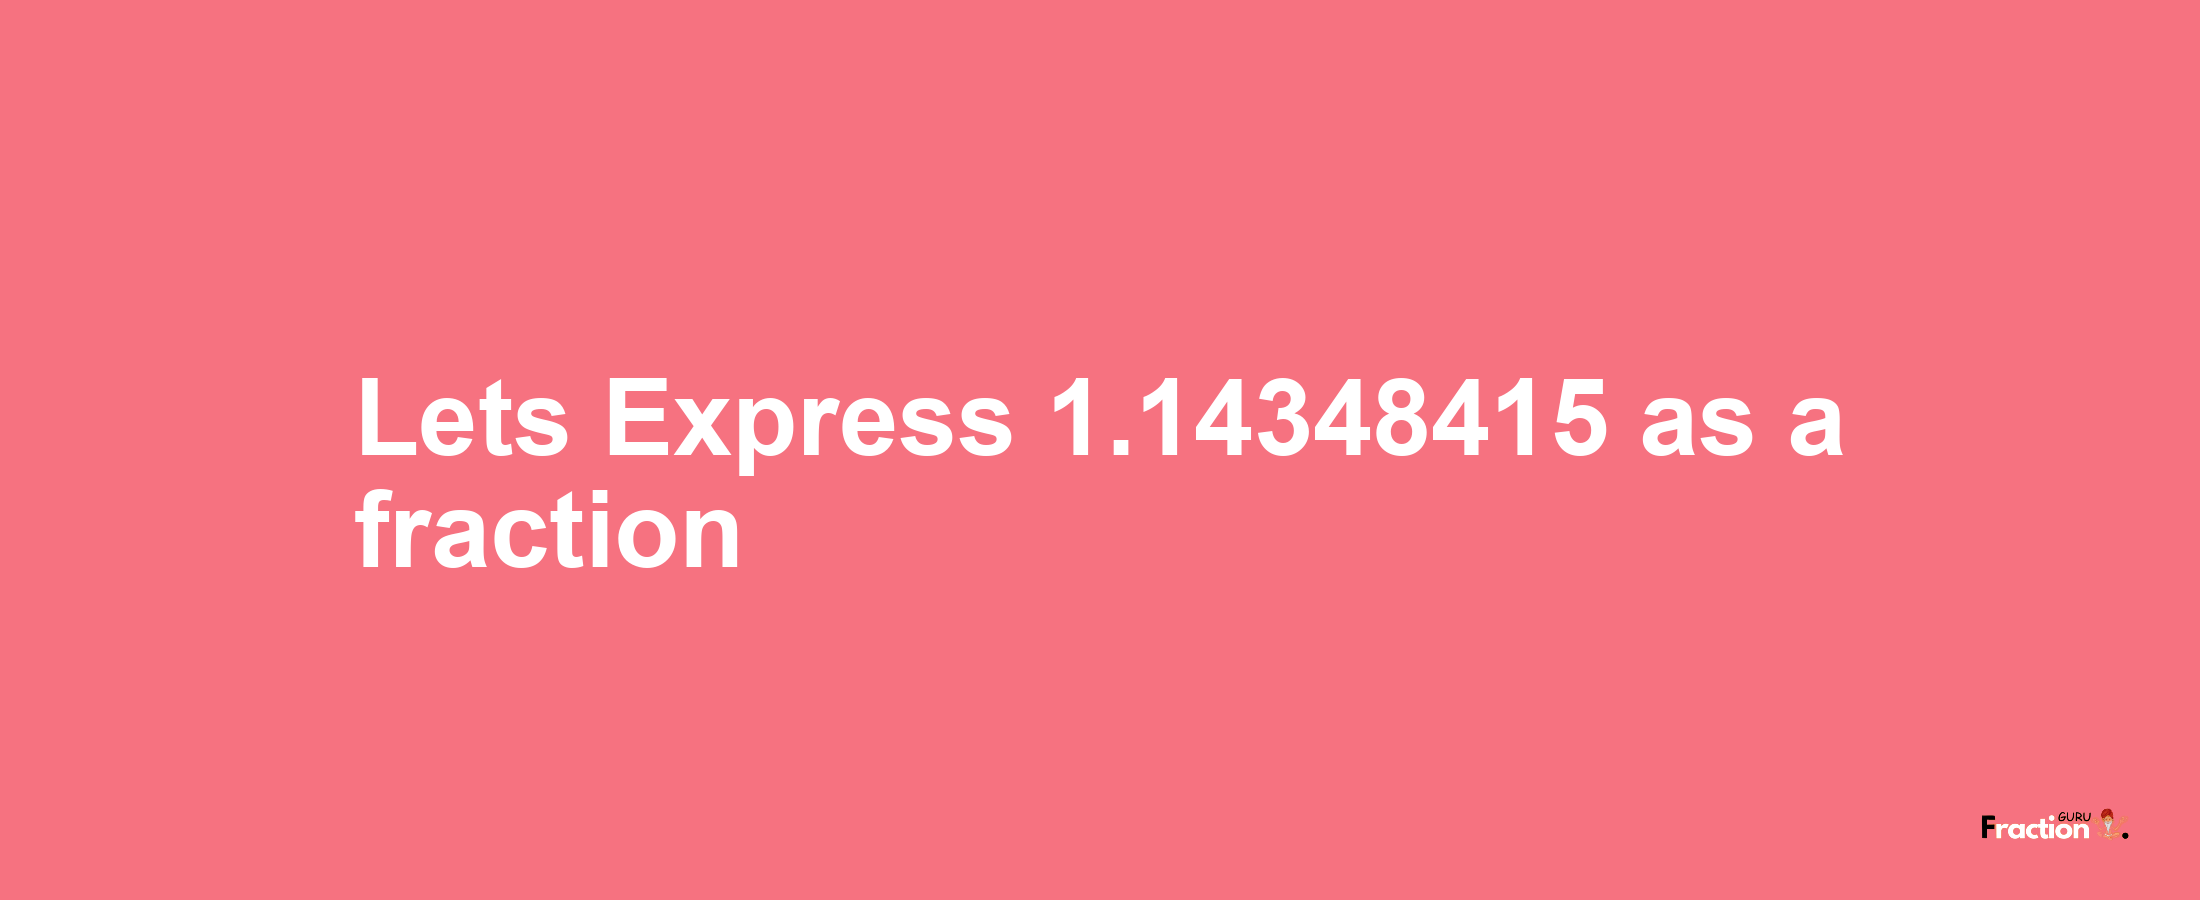 Lets Express 1.14348415 as afraction